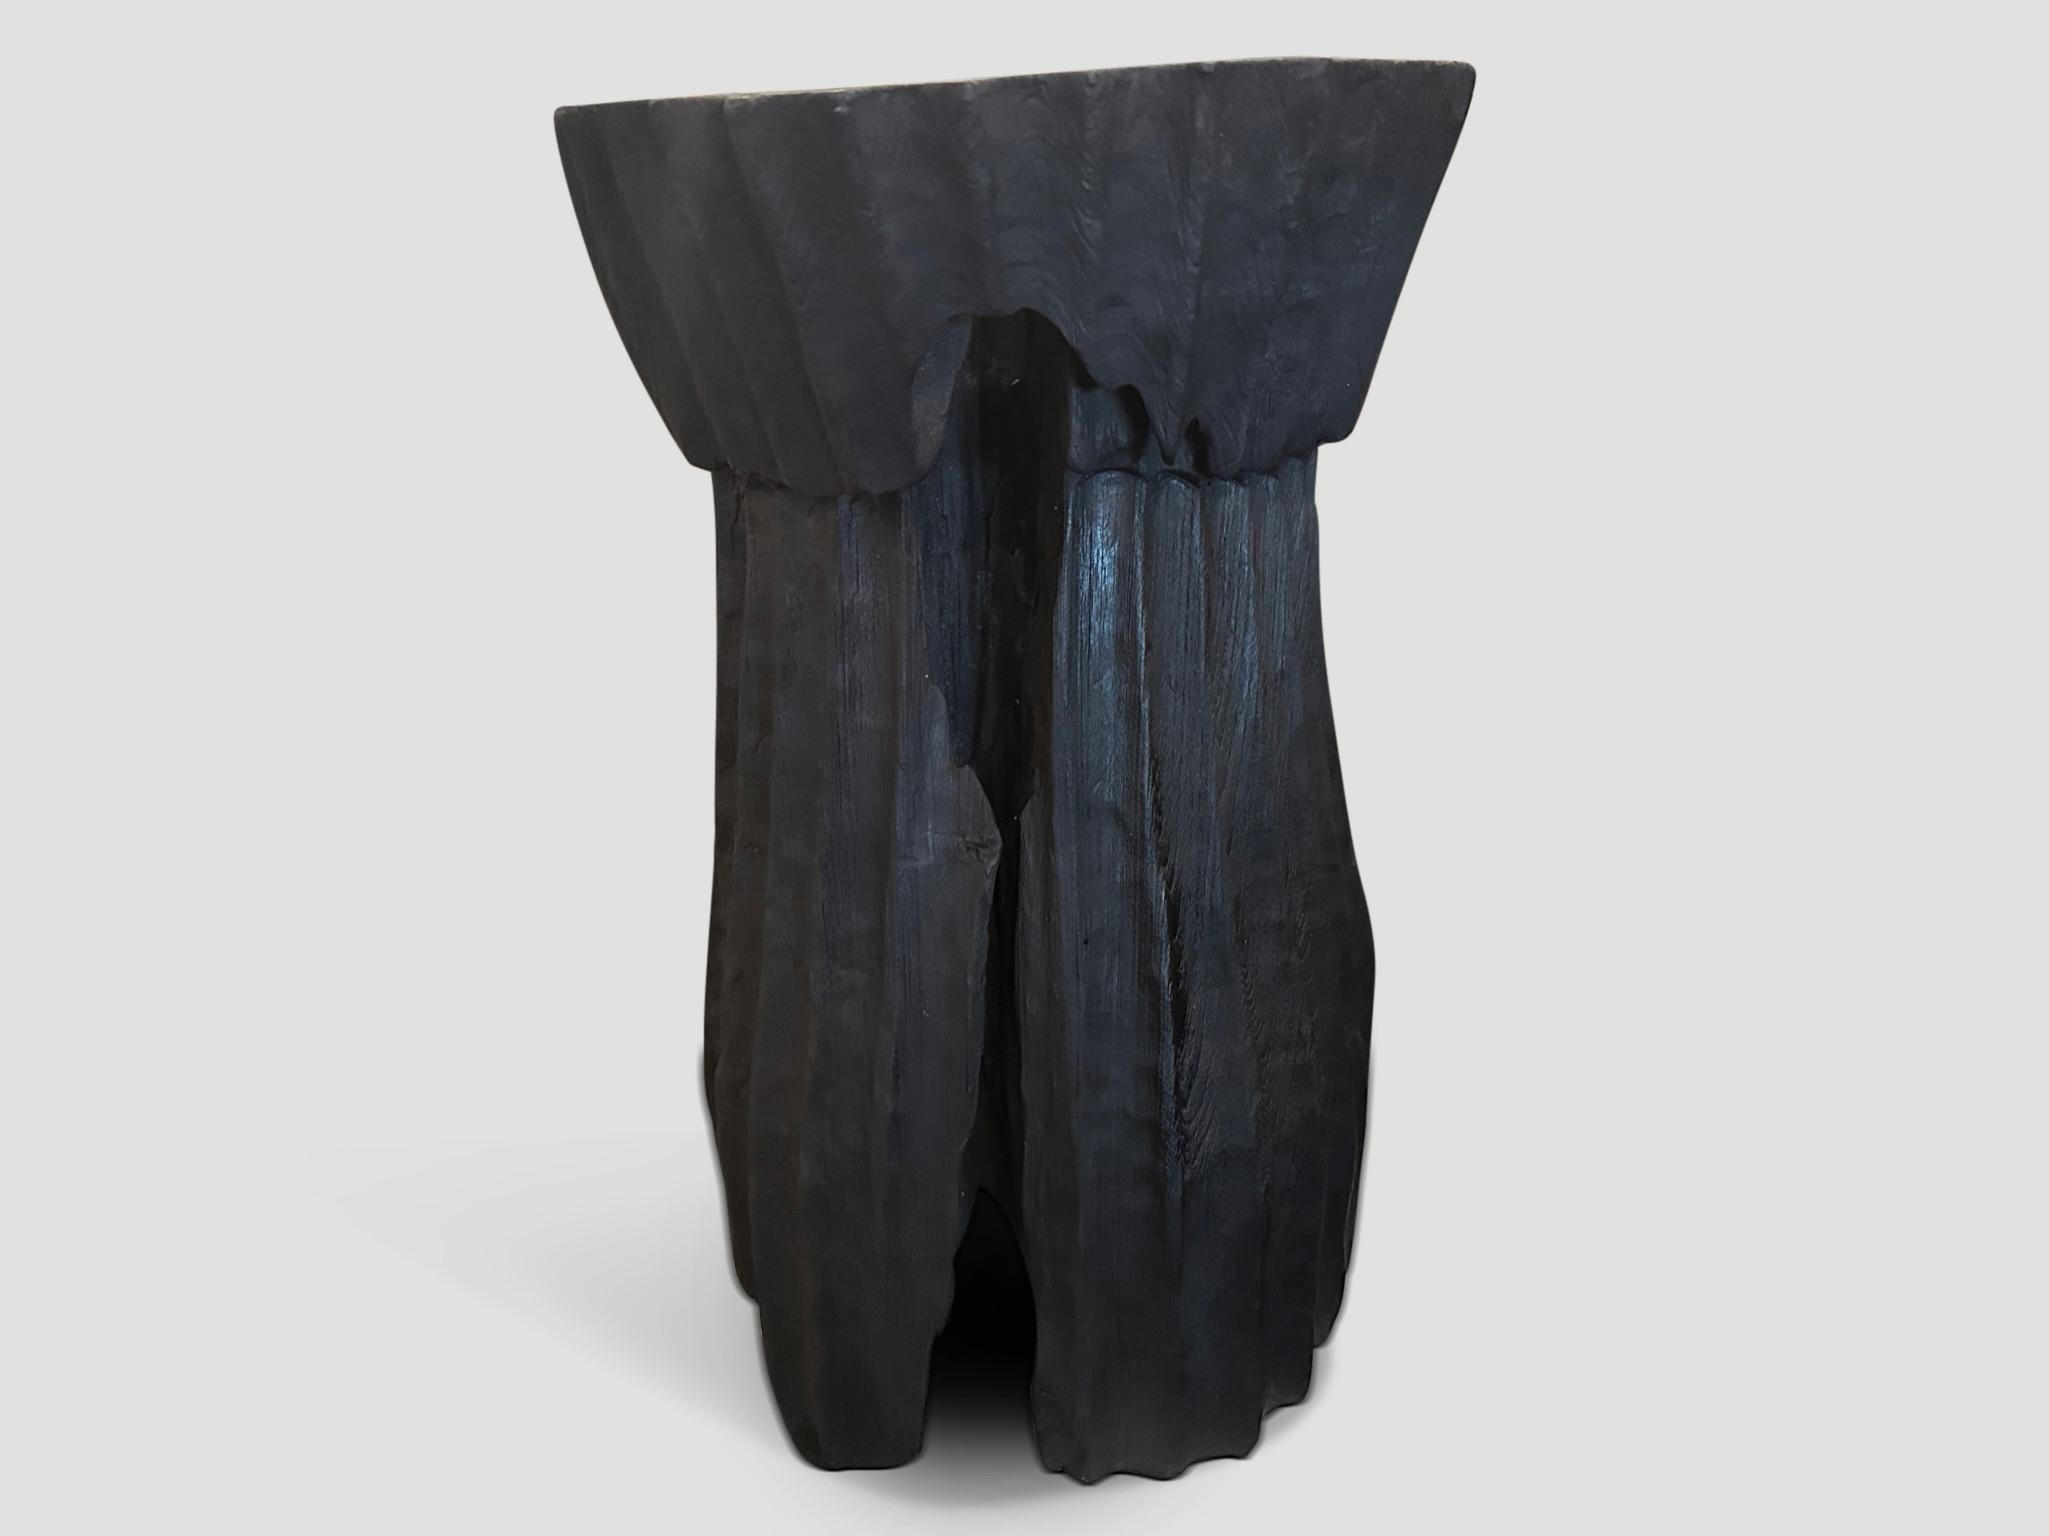 Beautiful hand carved minimalist charred teak wood side table or pedestal. We have a small collection in different shapes and sizes. The price reflects the one shown. Also available bleached.

The Triple Burnt Collection represents a unique line of